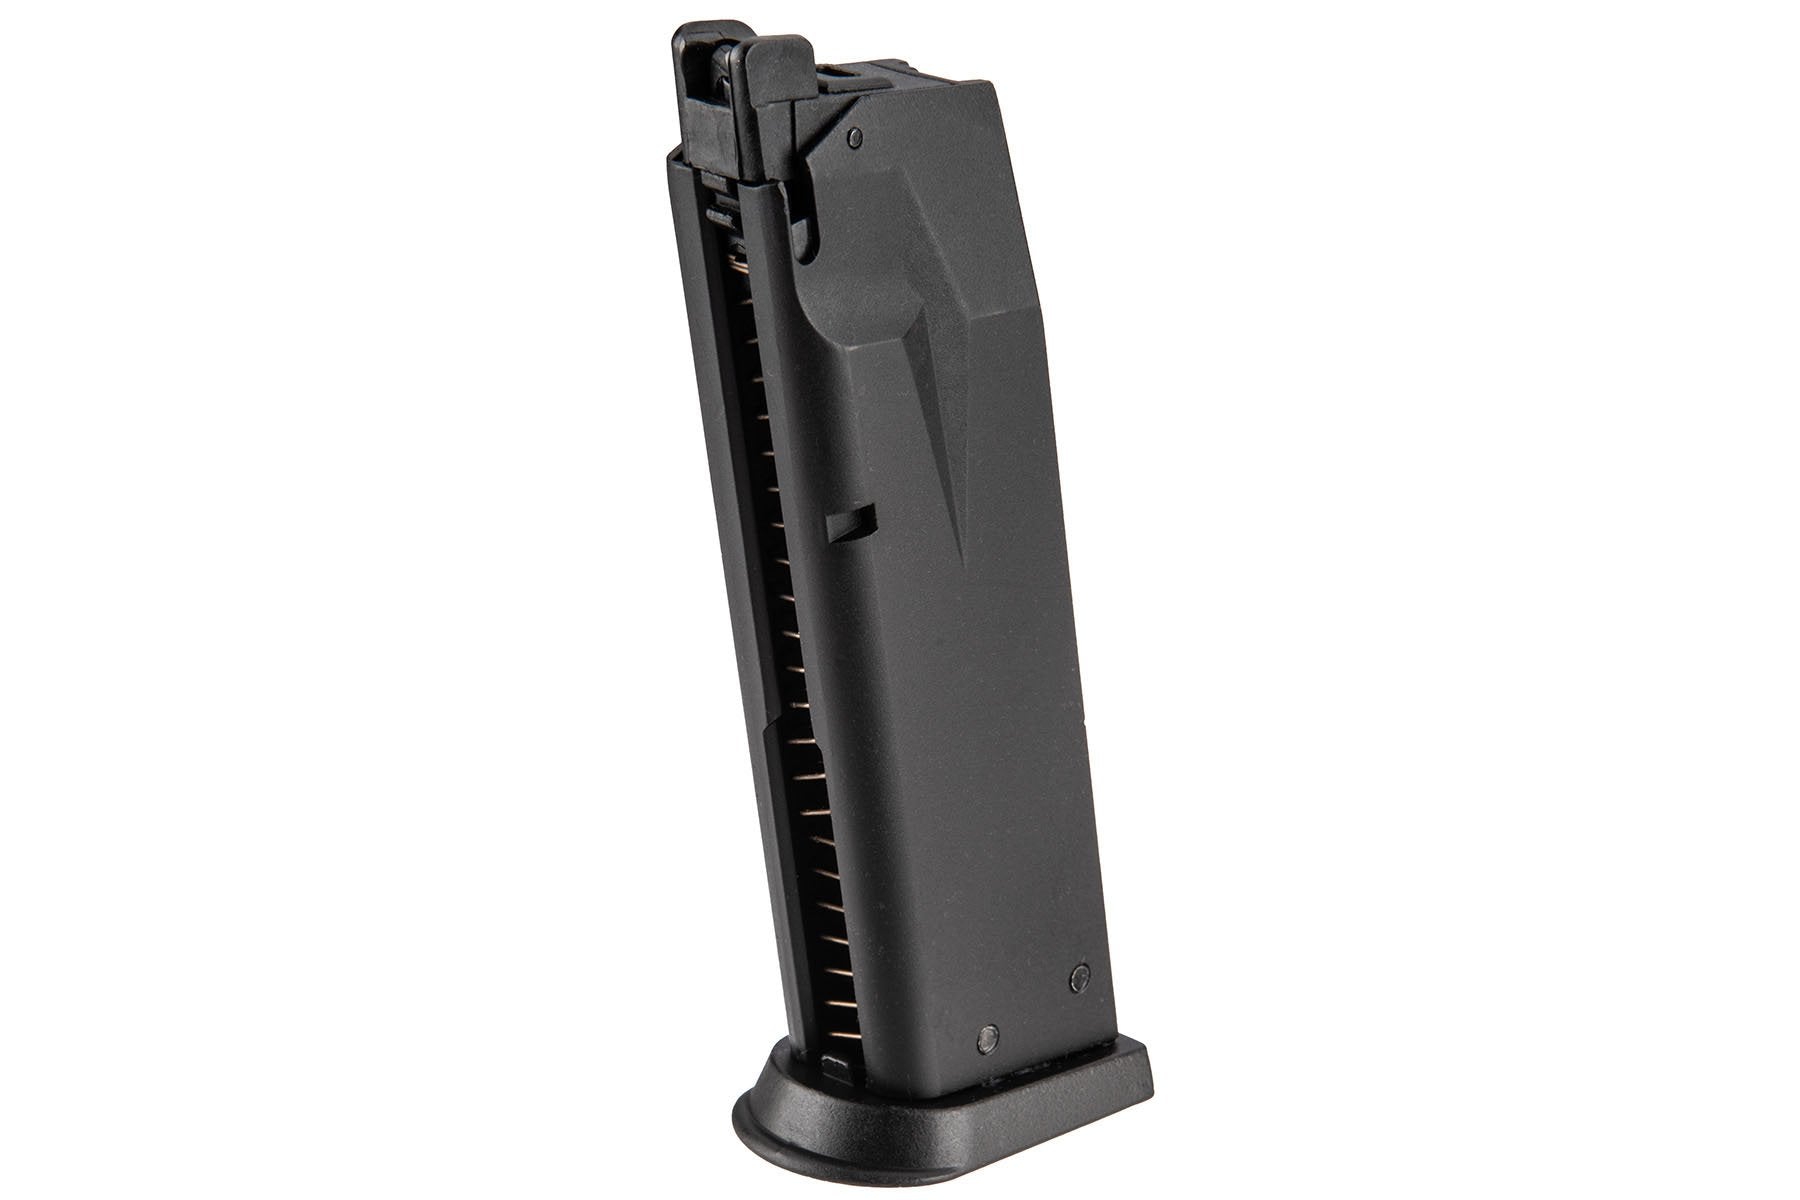 SIG SAUER AIRSOFT PROFORCE P229 GREEN GAS MAGAZINE AMPF-229 - Newest Products